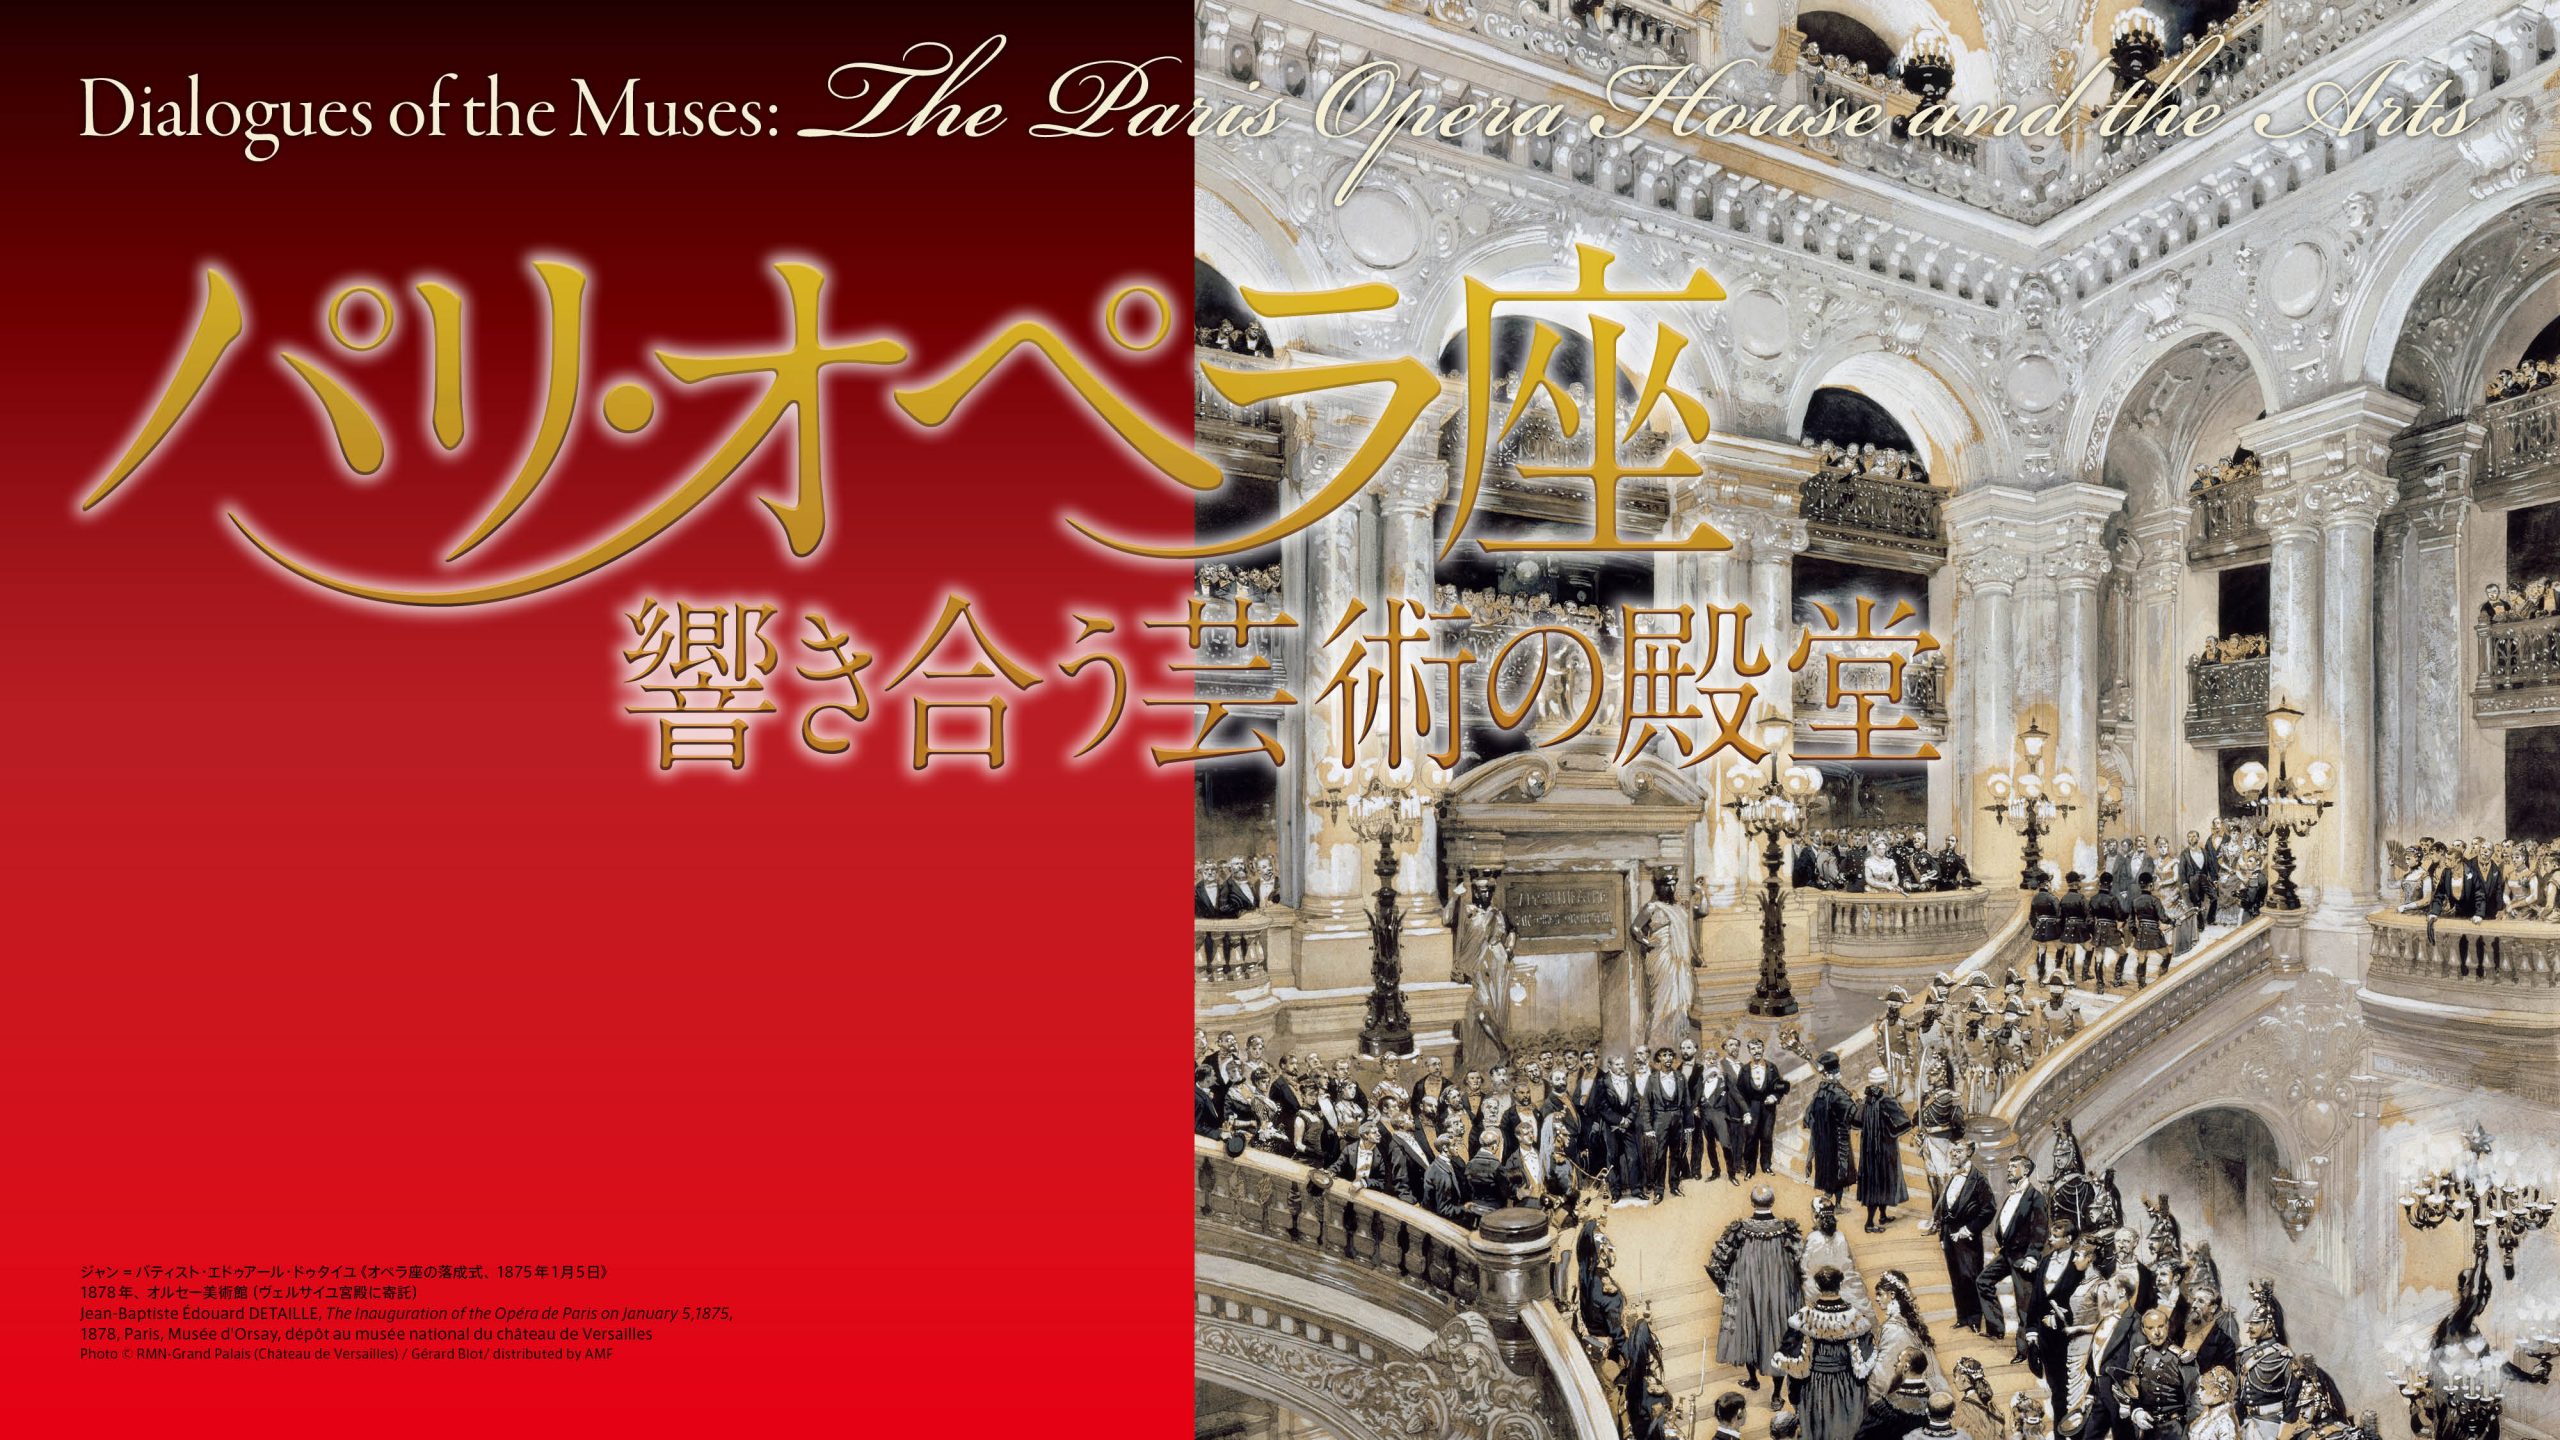 【UPCOMING】Dialogues of the Muses: The Paris Opera House and the Arts